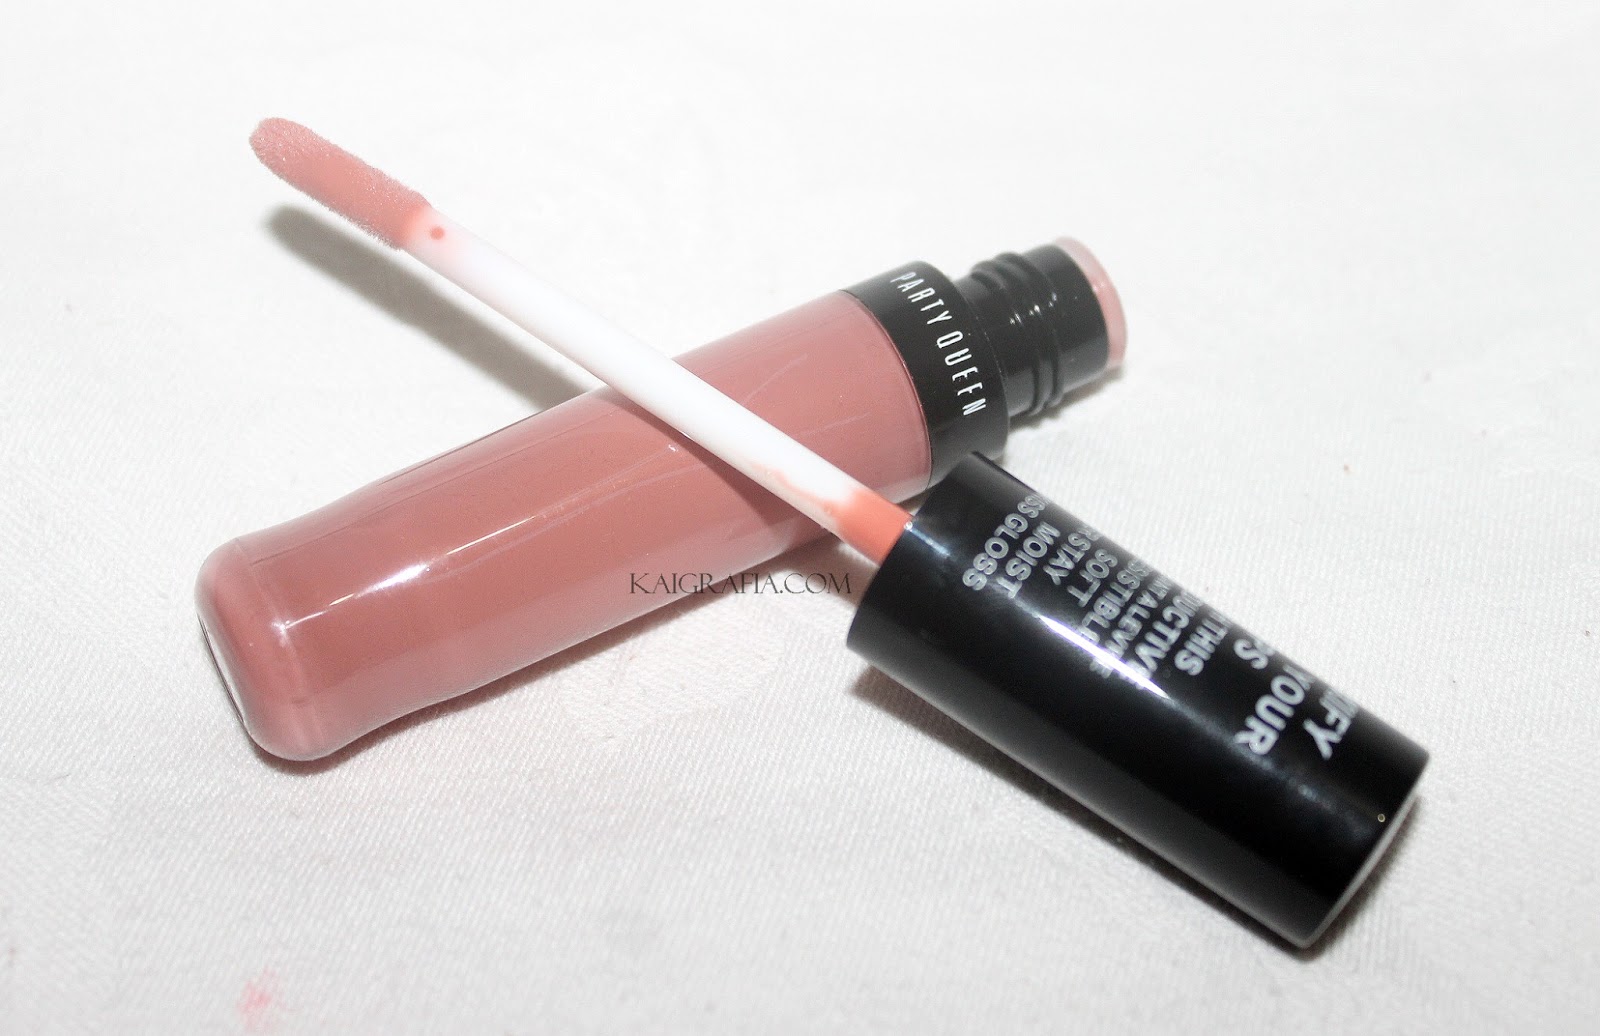 Party Queen Kissproof lipgloss affordable makeup